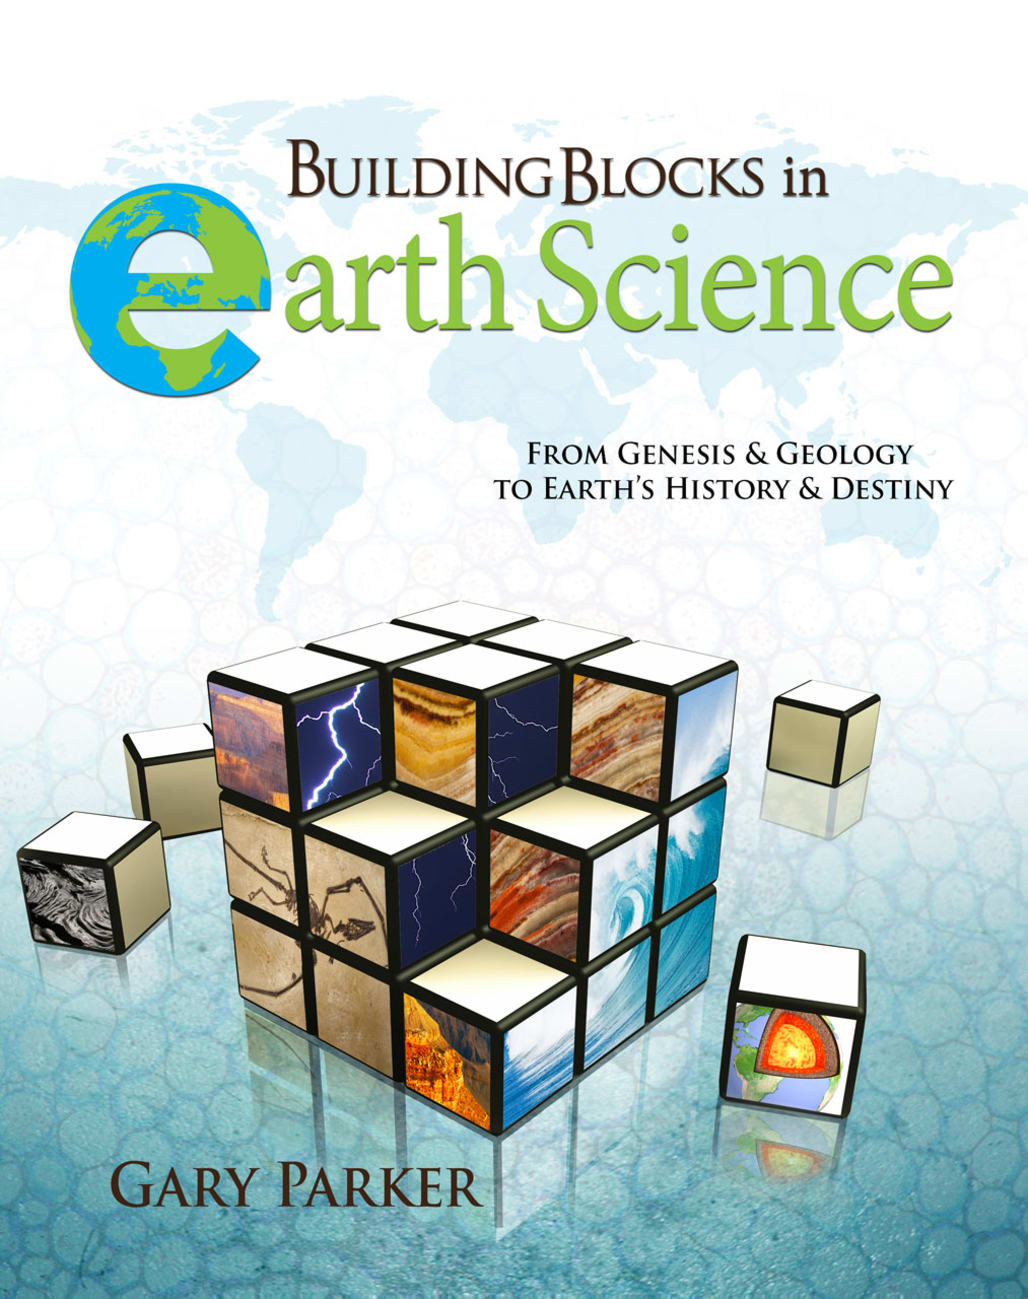 Building Blocks in Earth Science: From Genesis & Geology to Earth's History & Destiny Paperback